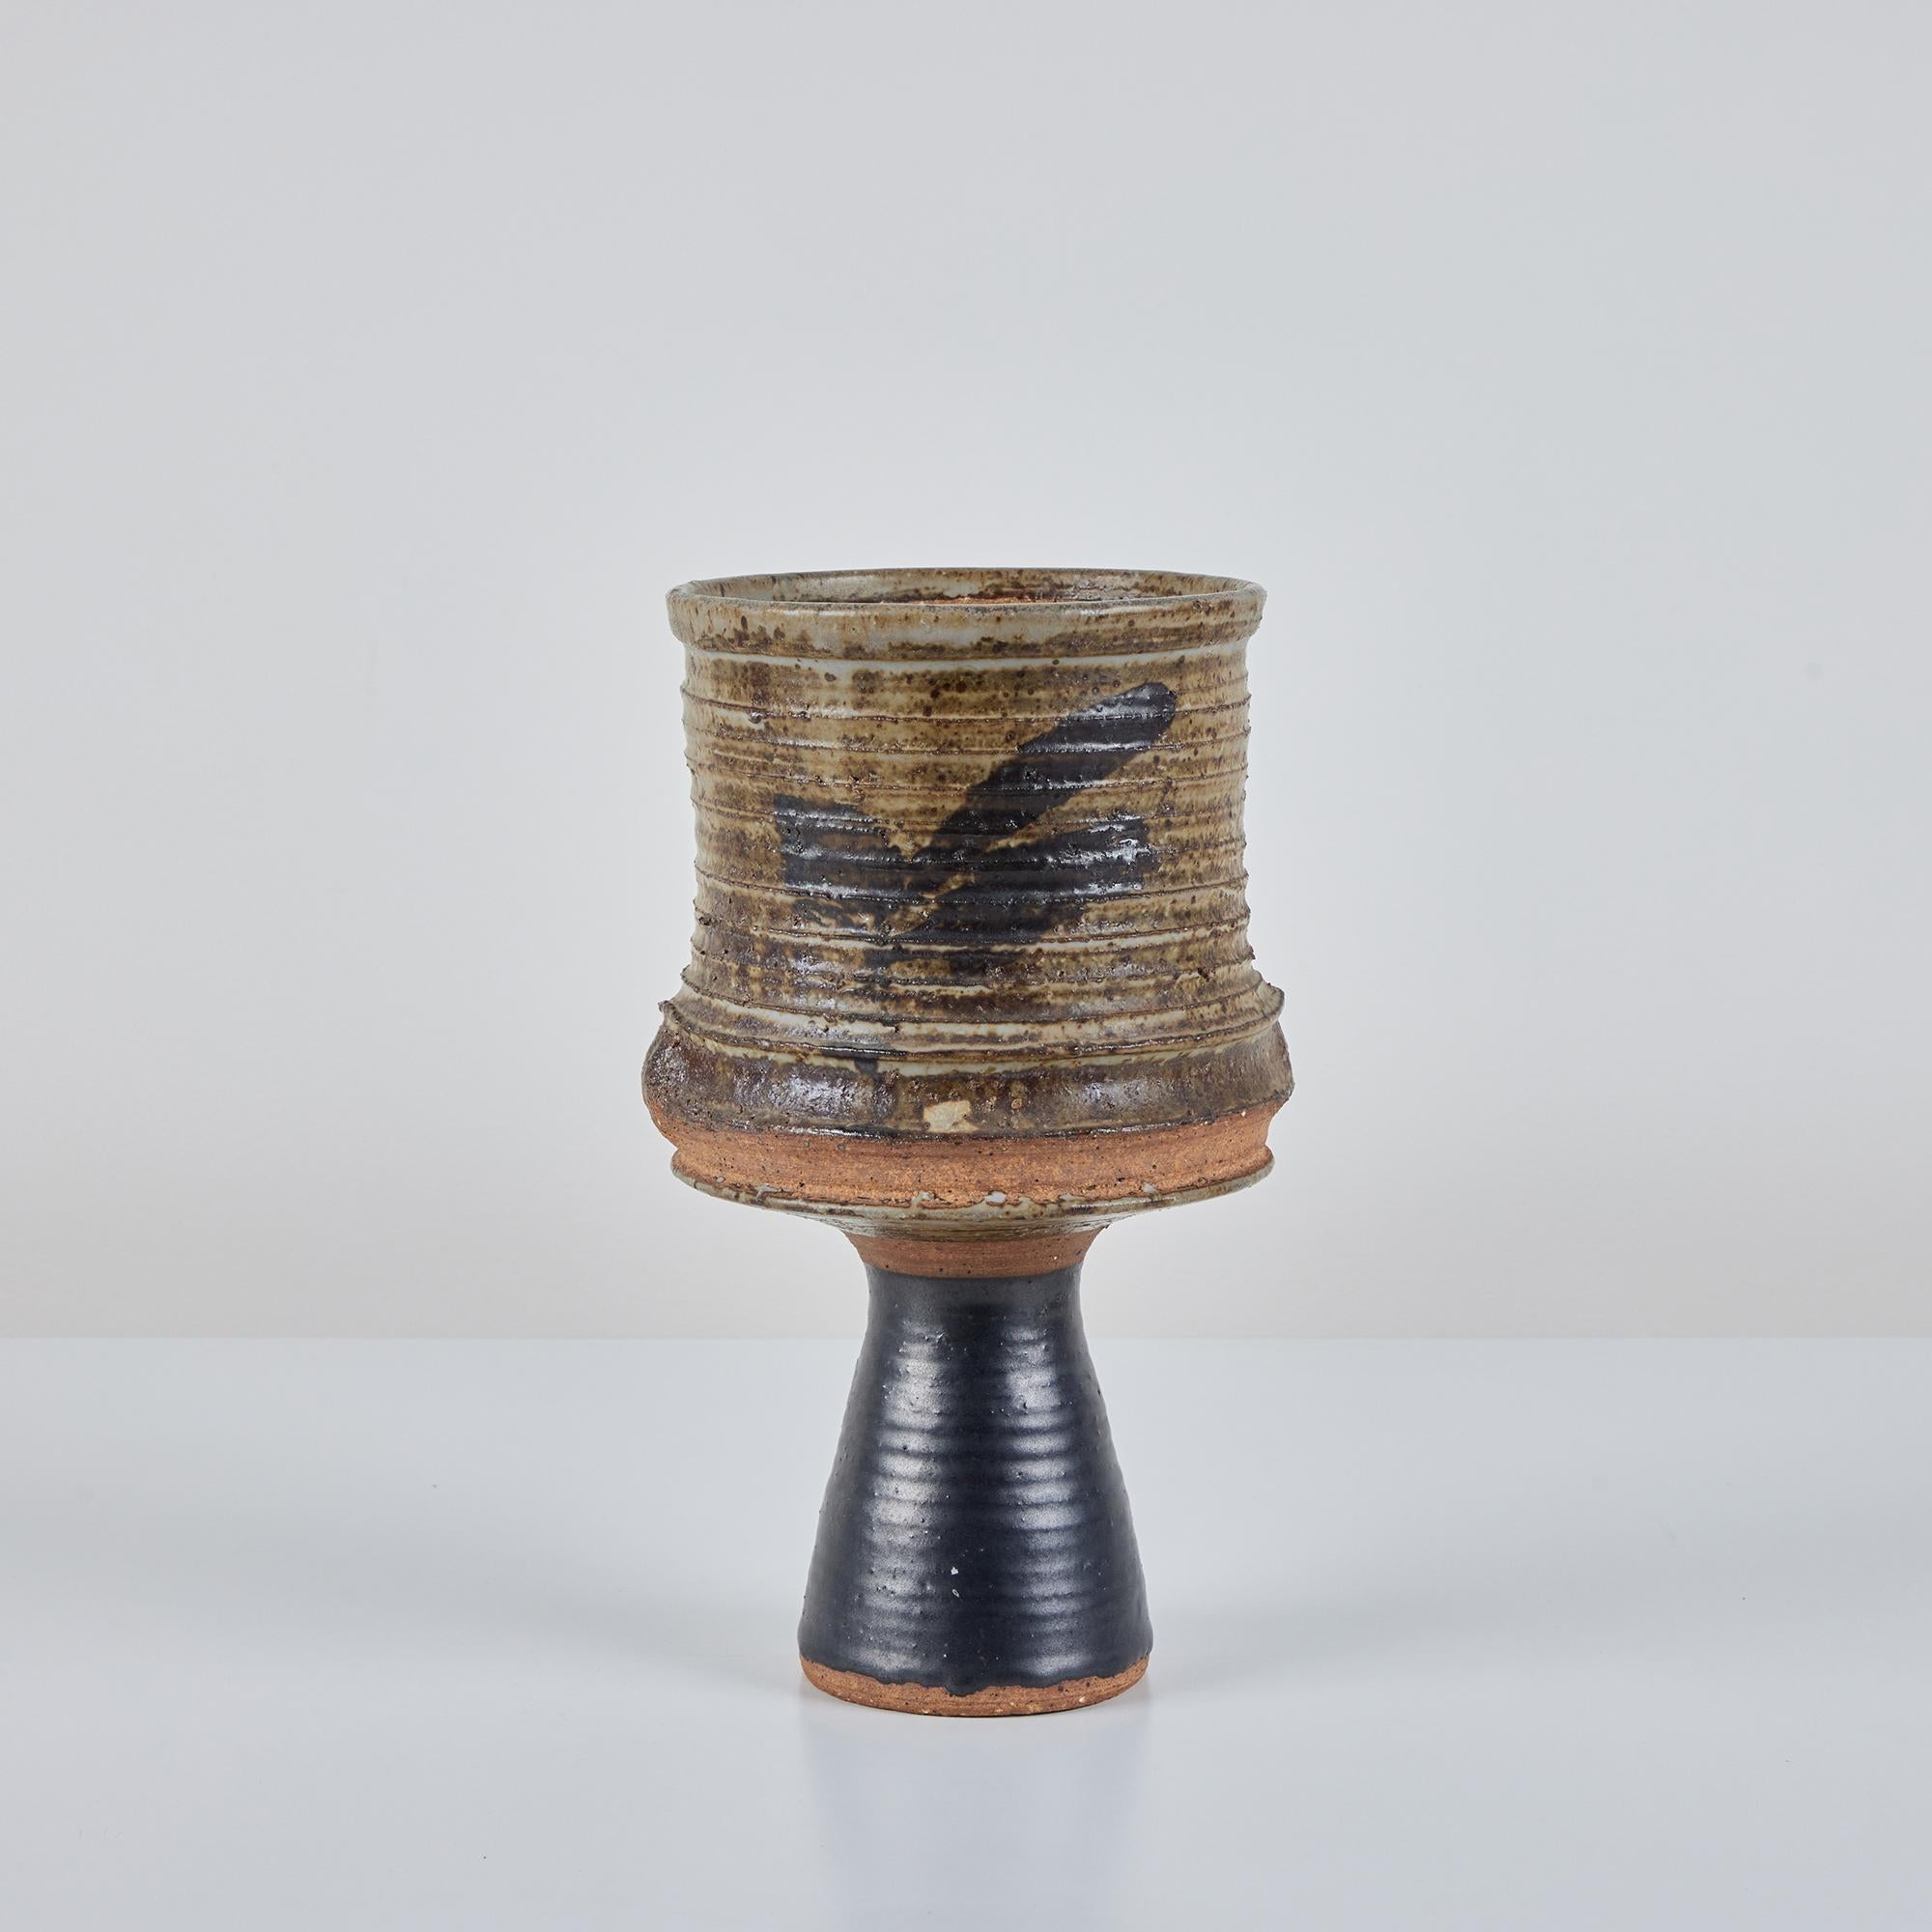 A tall, stoneware ribbed cylindrical vase with imperfect forest green glaze on the body's ribbed portion. This would easily fit in sitting empty on a shelf as a decorative object, or full of flowers on a credenza . Containers like these, with a